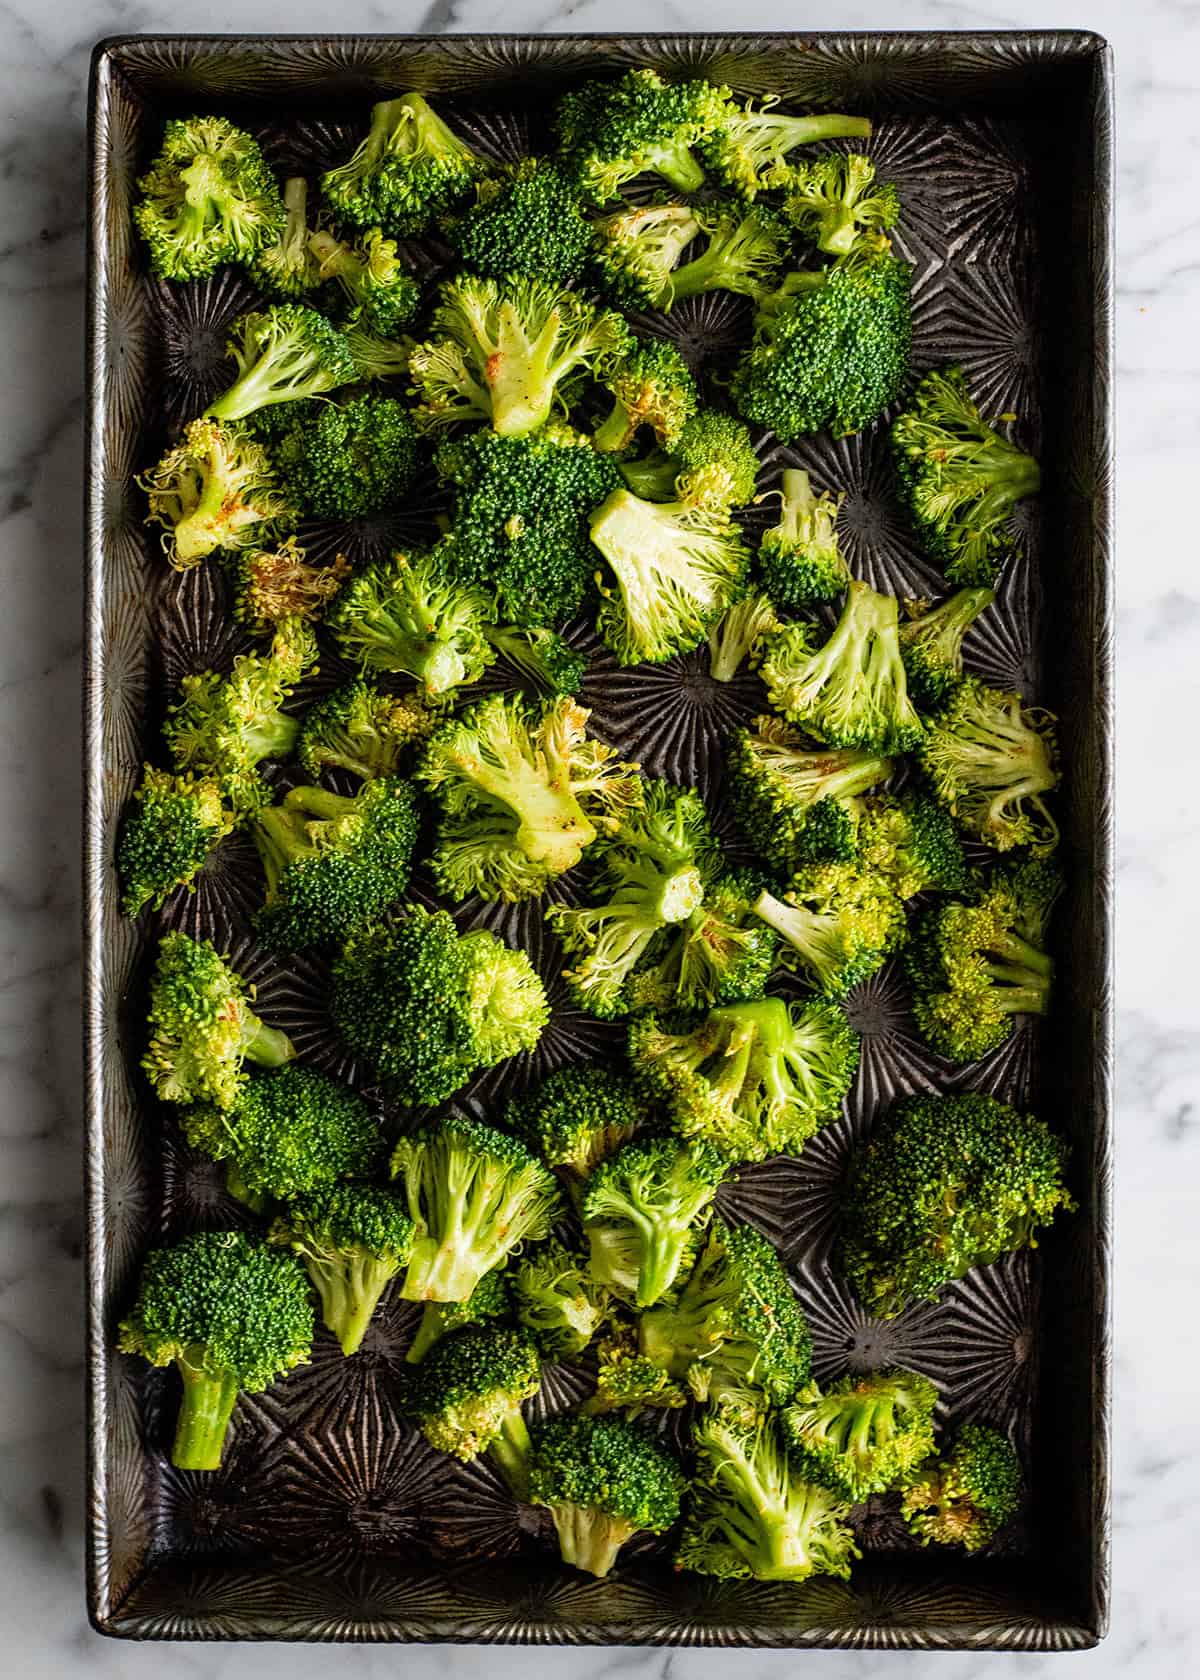 how to roast broccoli in the oven - broccoli on a baking sheet before roasting